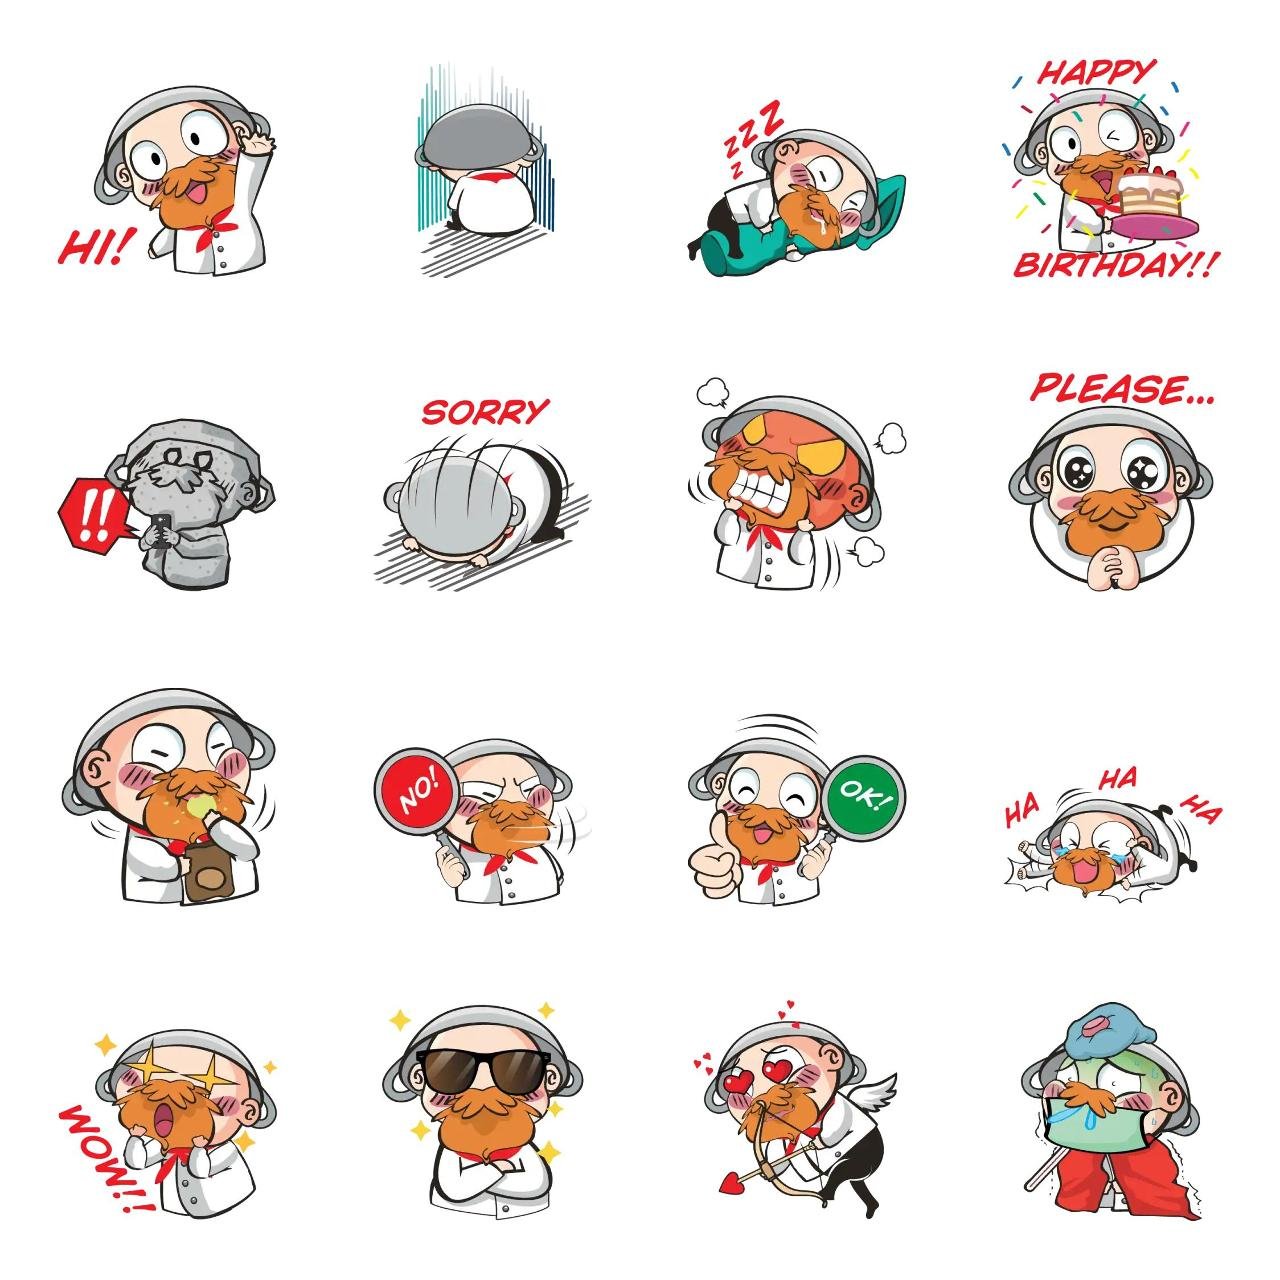 Cute Chef Animation/Cartoon sticker pack for Whatsapp, Telegram, Signal, and others chatting and message apps